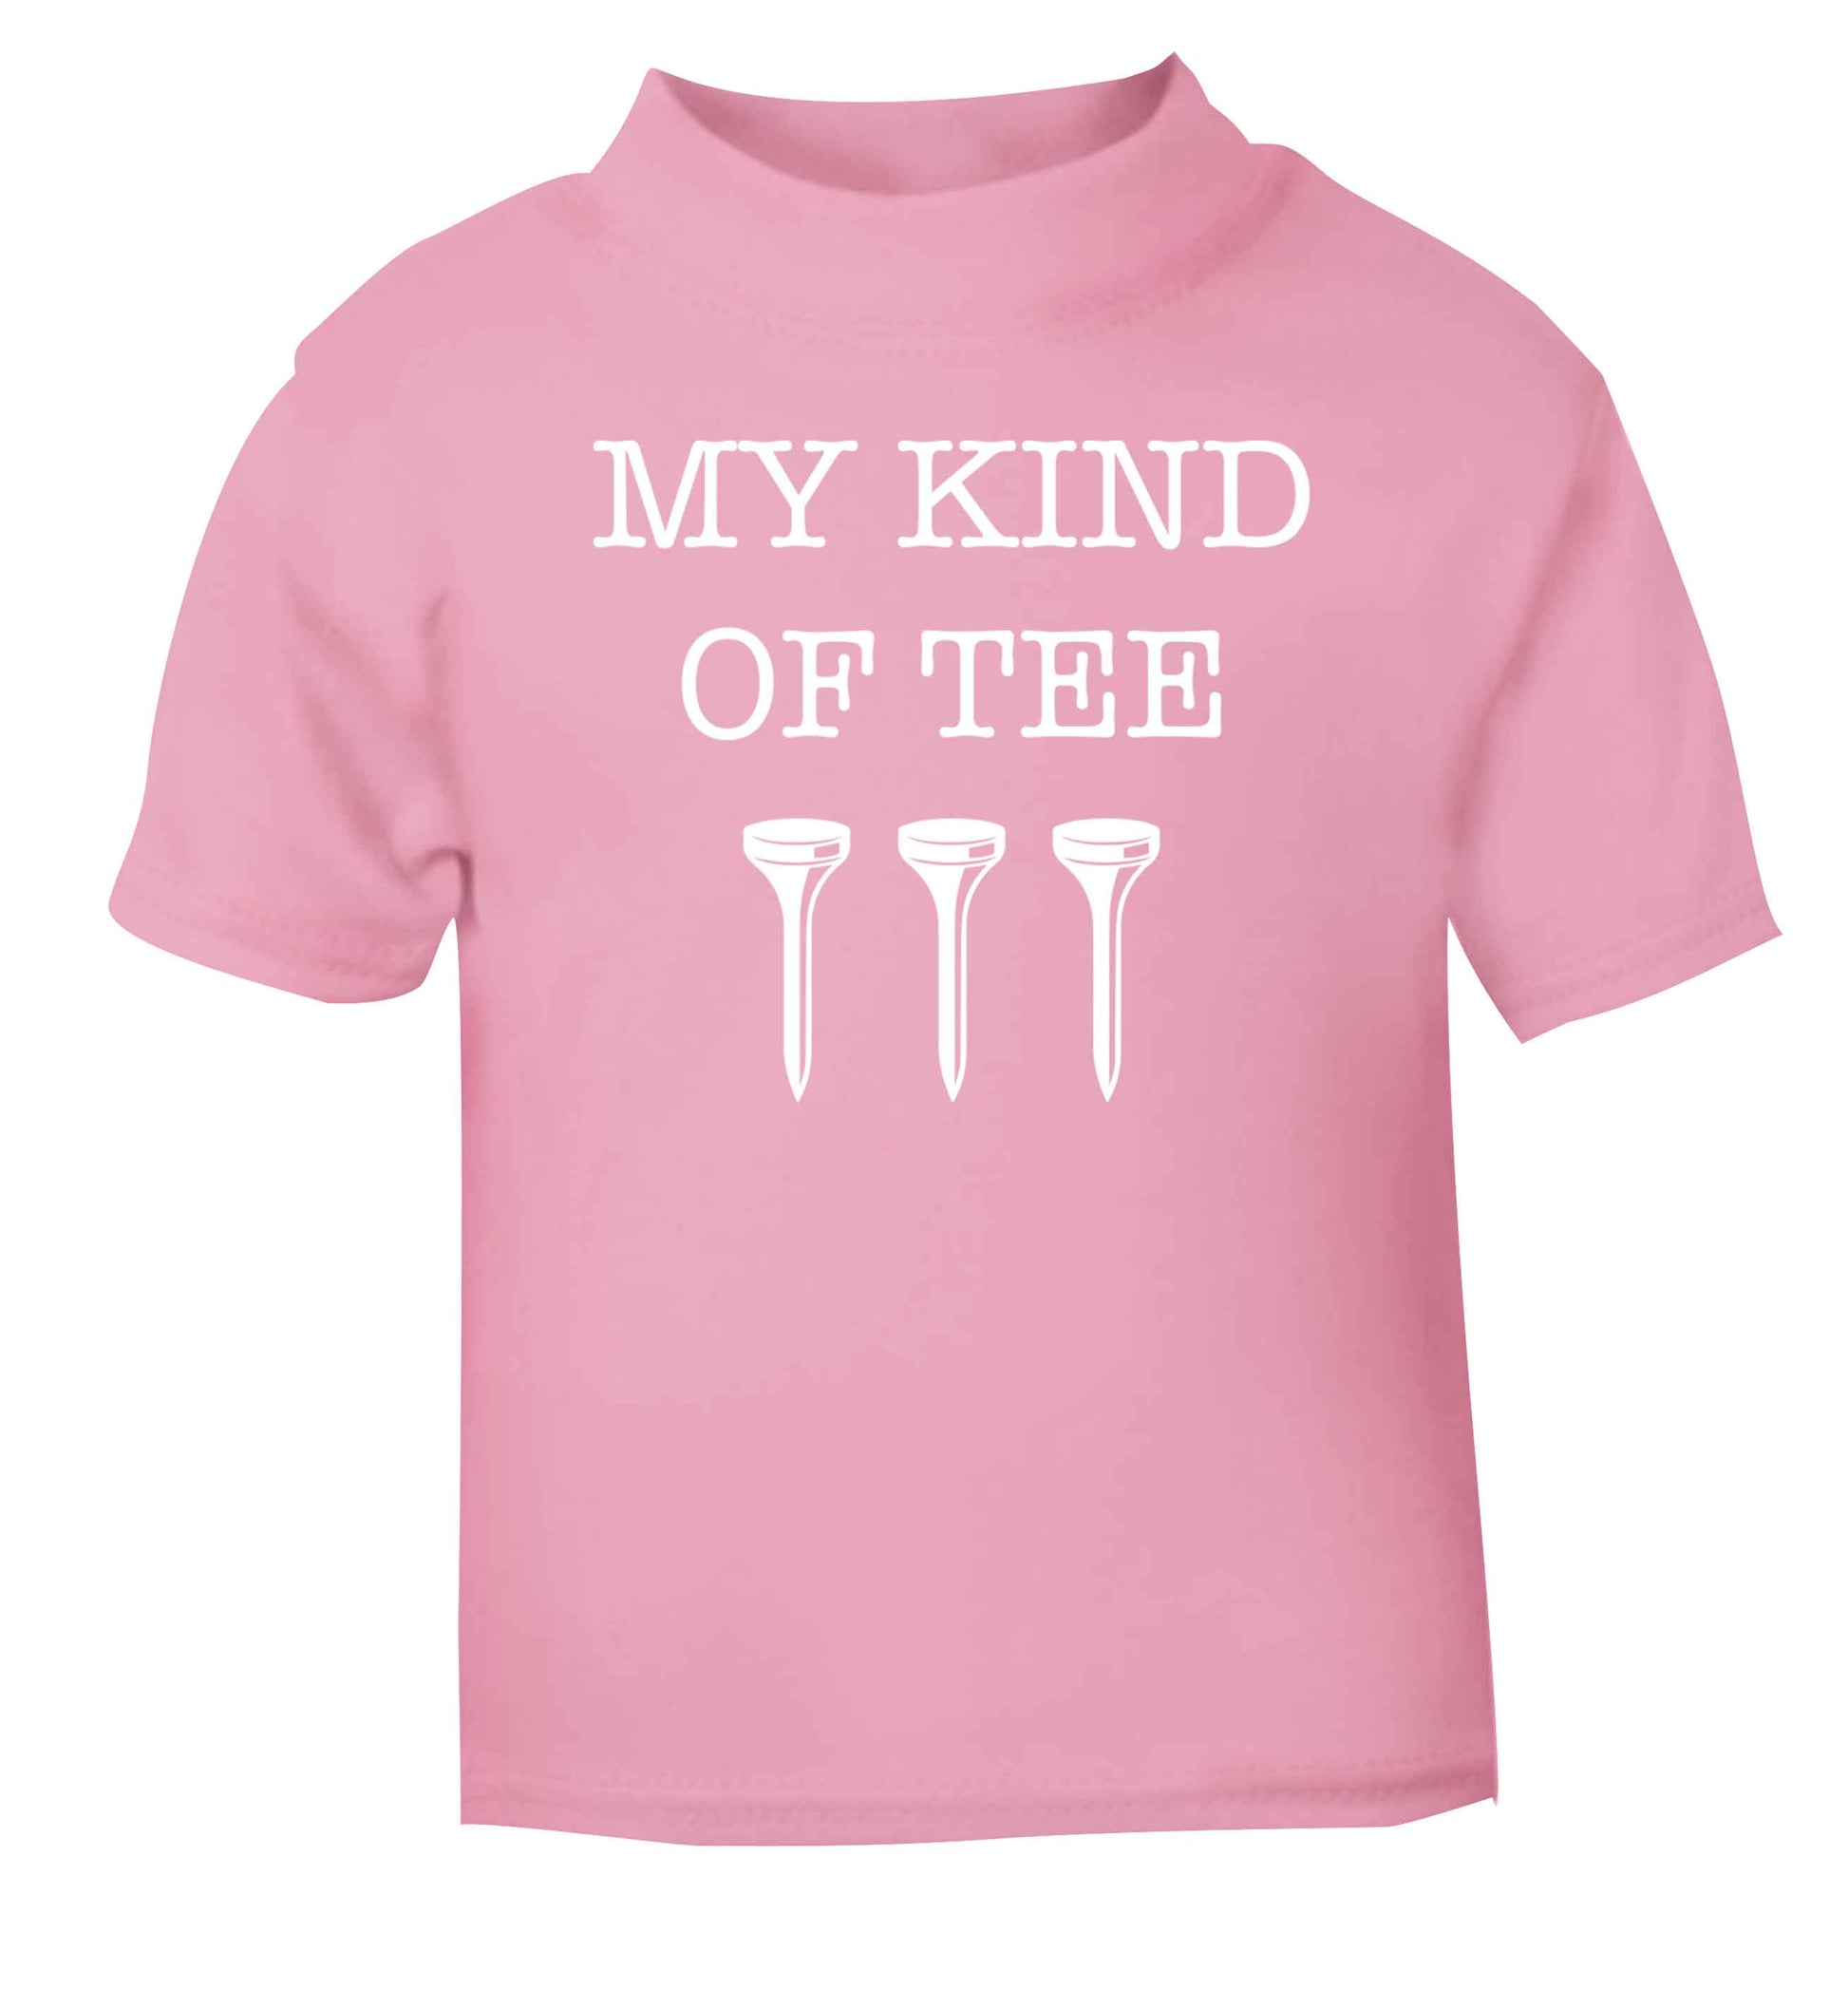 My kind of tee light pink Baby Toddler Tshirt 2 Years